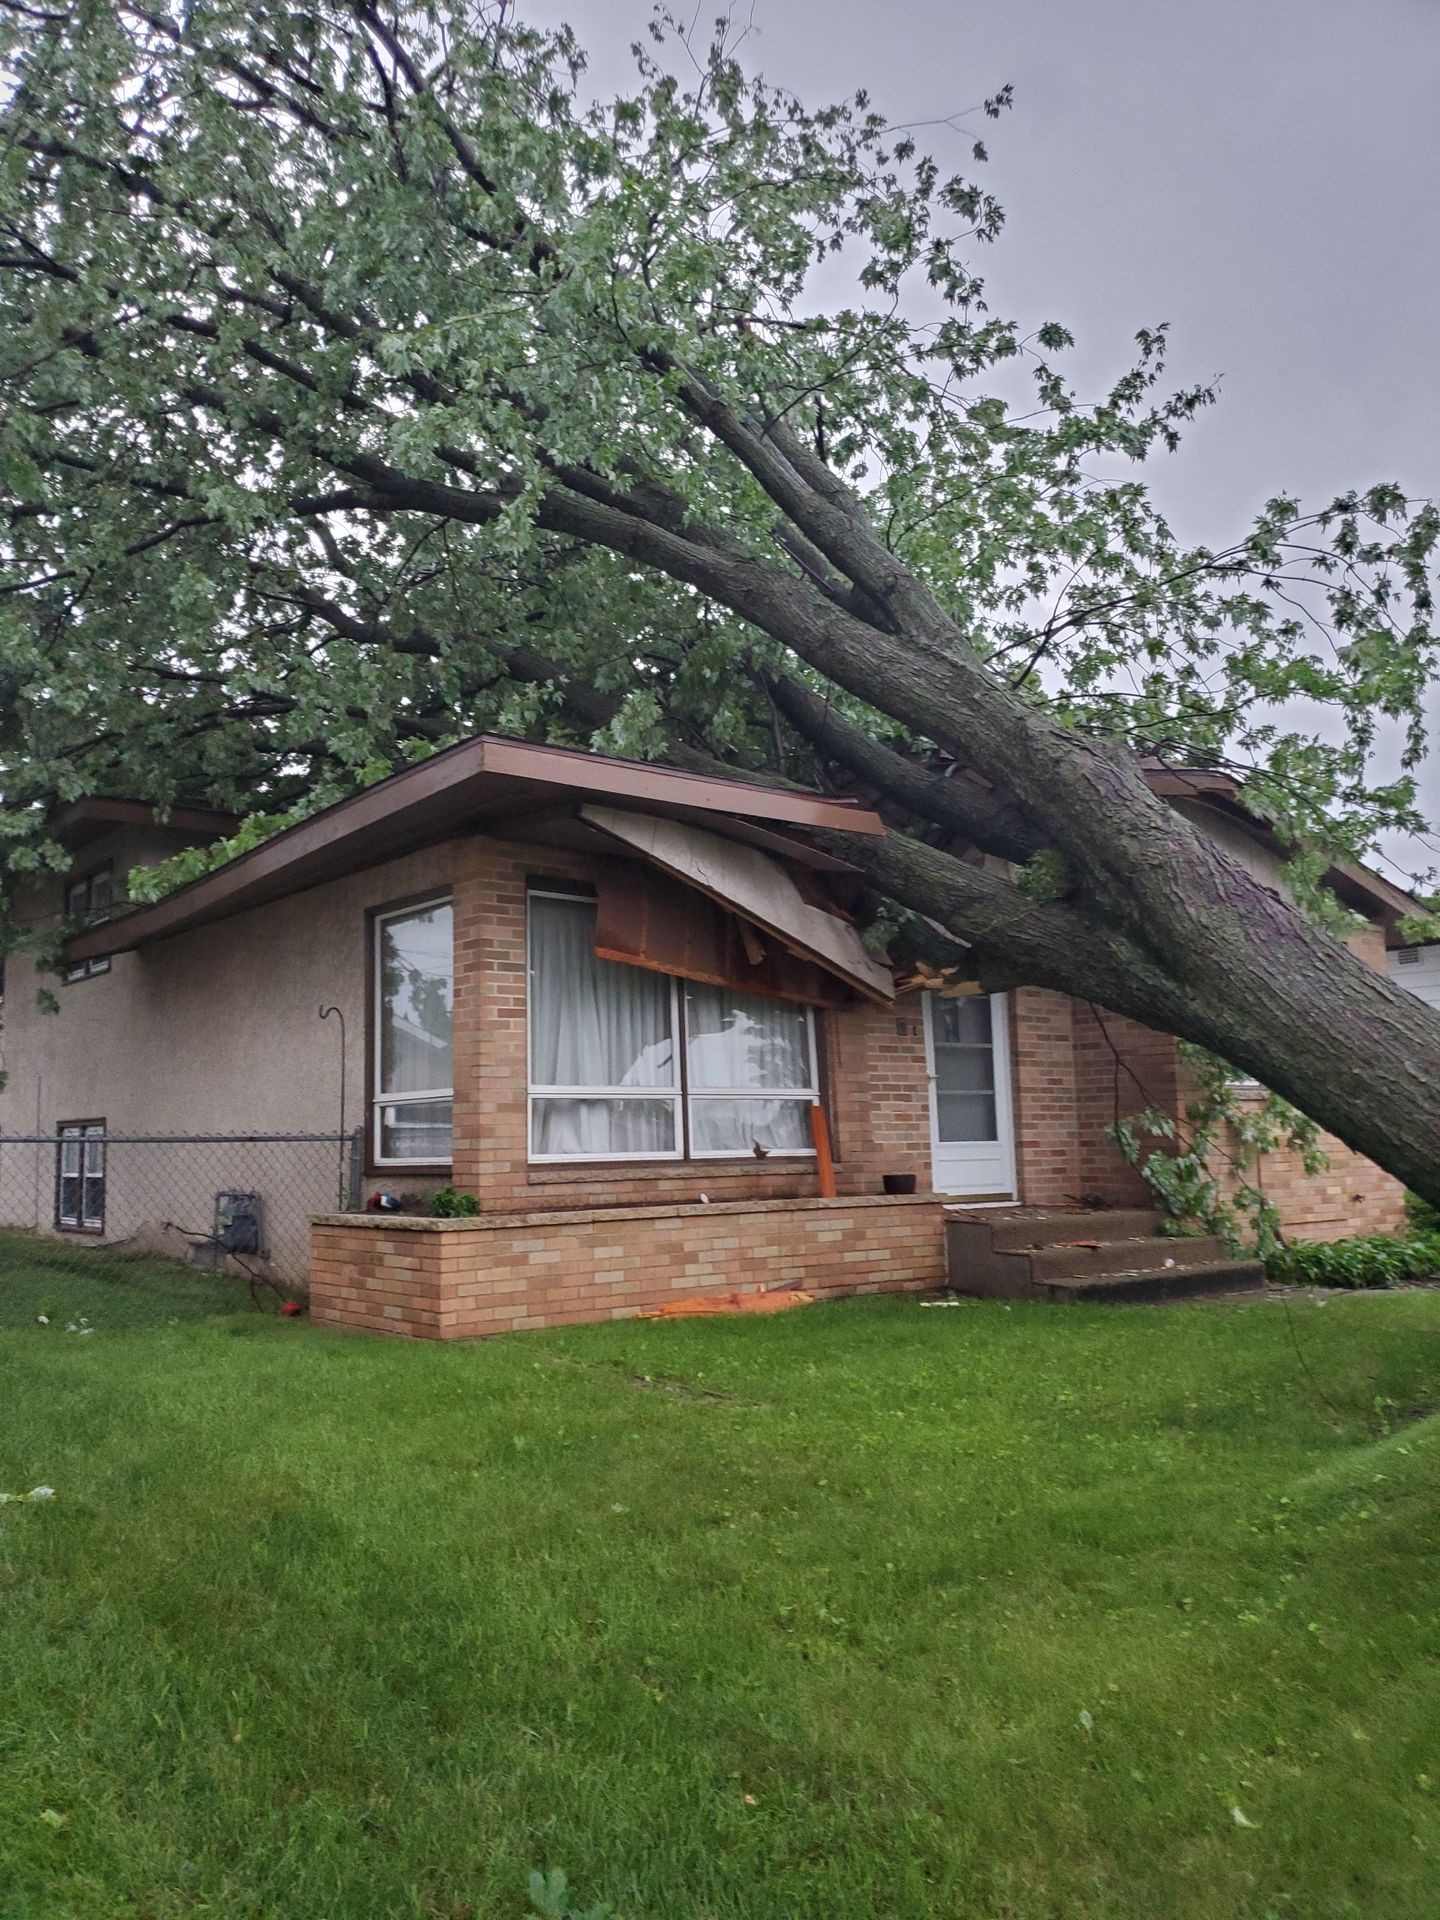 Avoid your tree falling on your house like this tree.